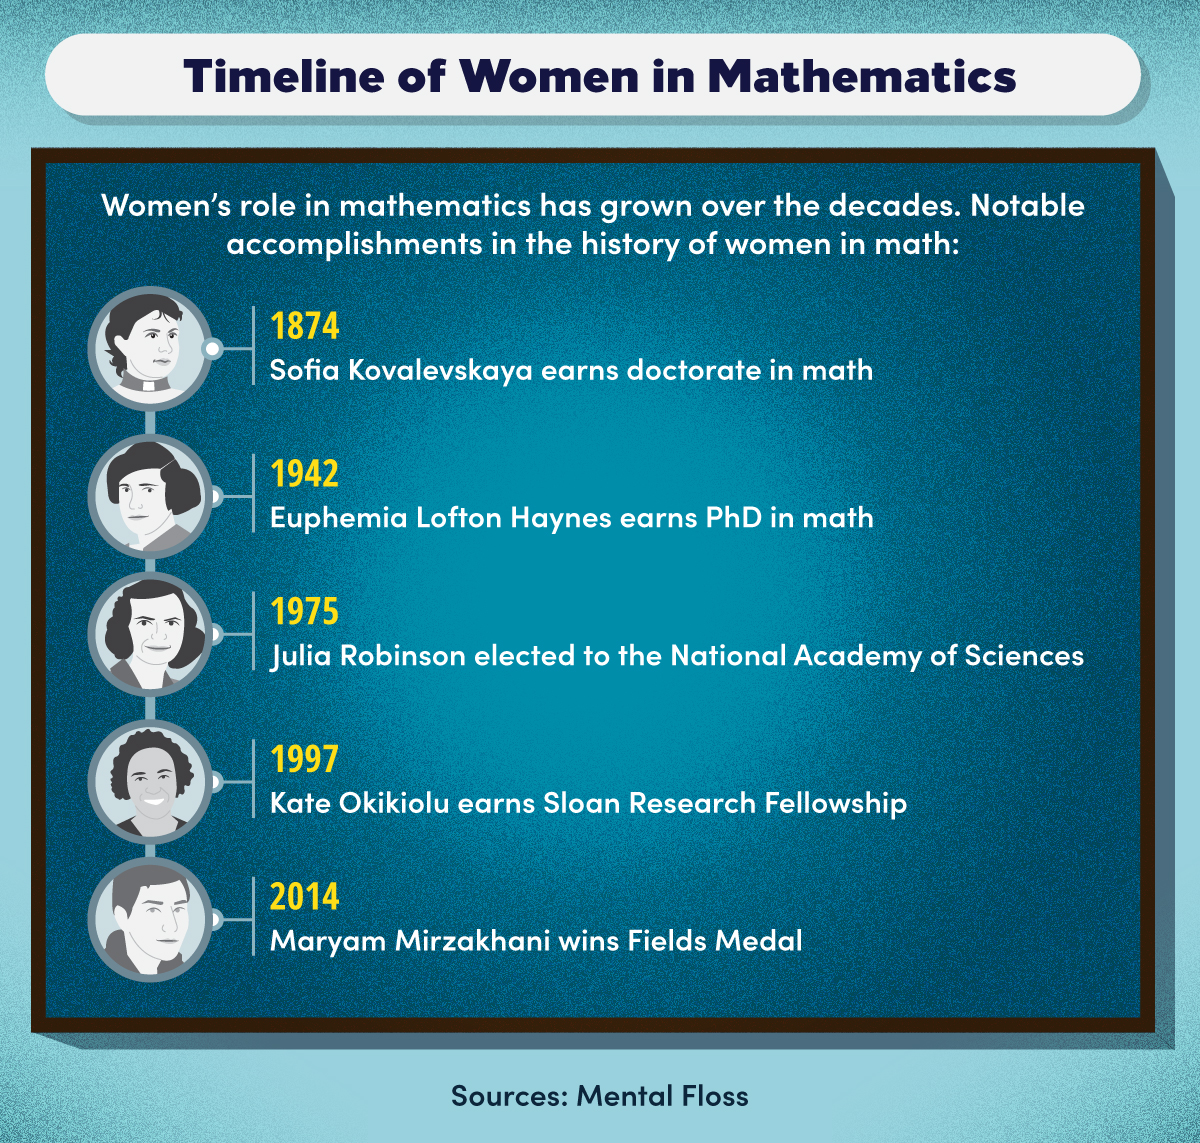 Women have made notable accomplishments in mathematics throughout history.